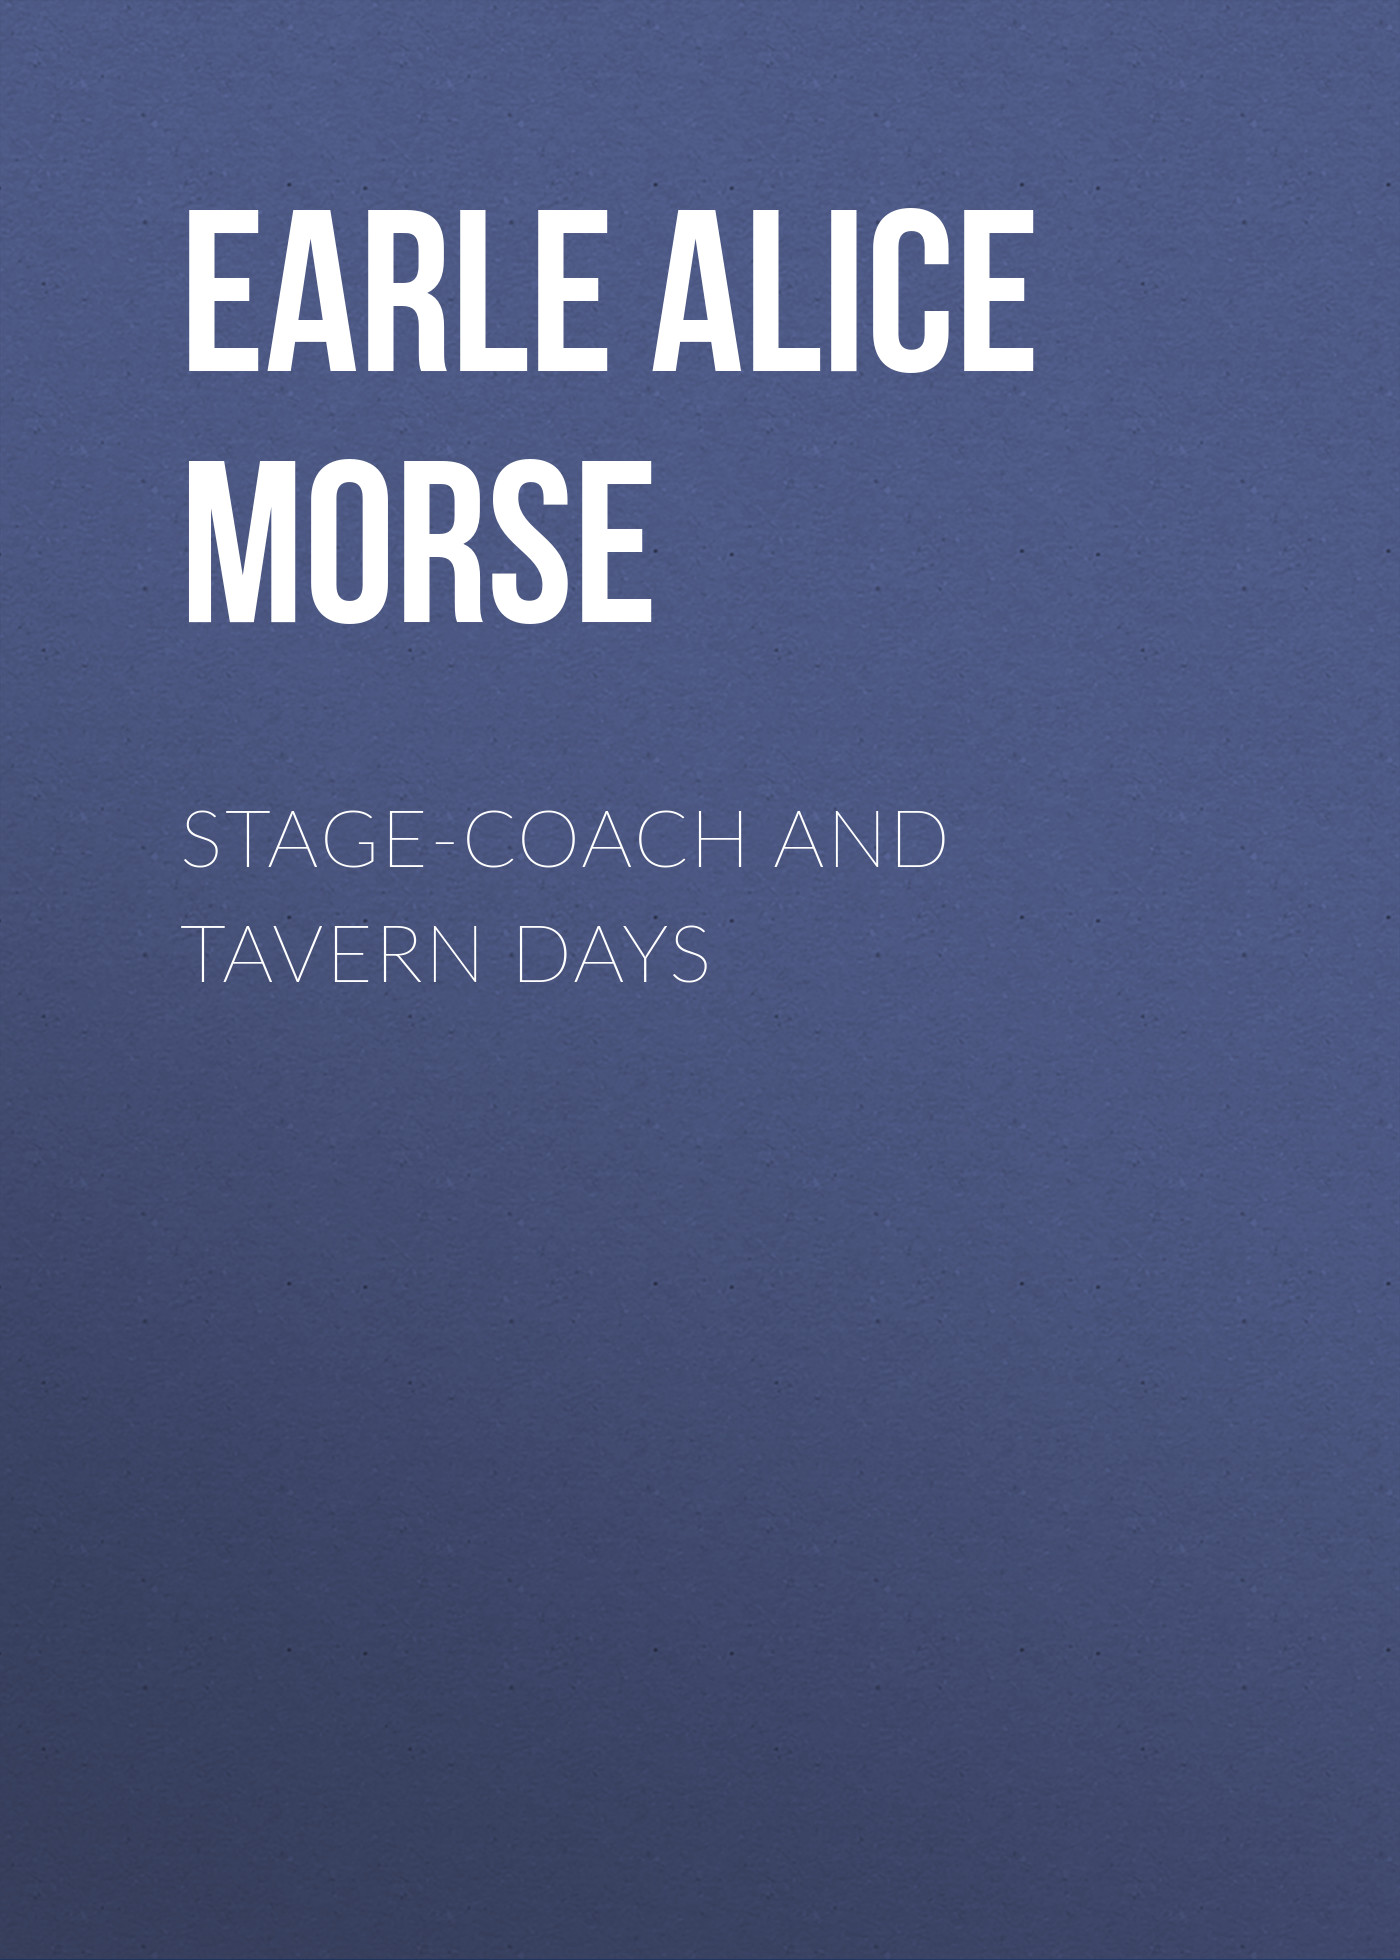 Stage-coach and Tavern Days